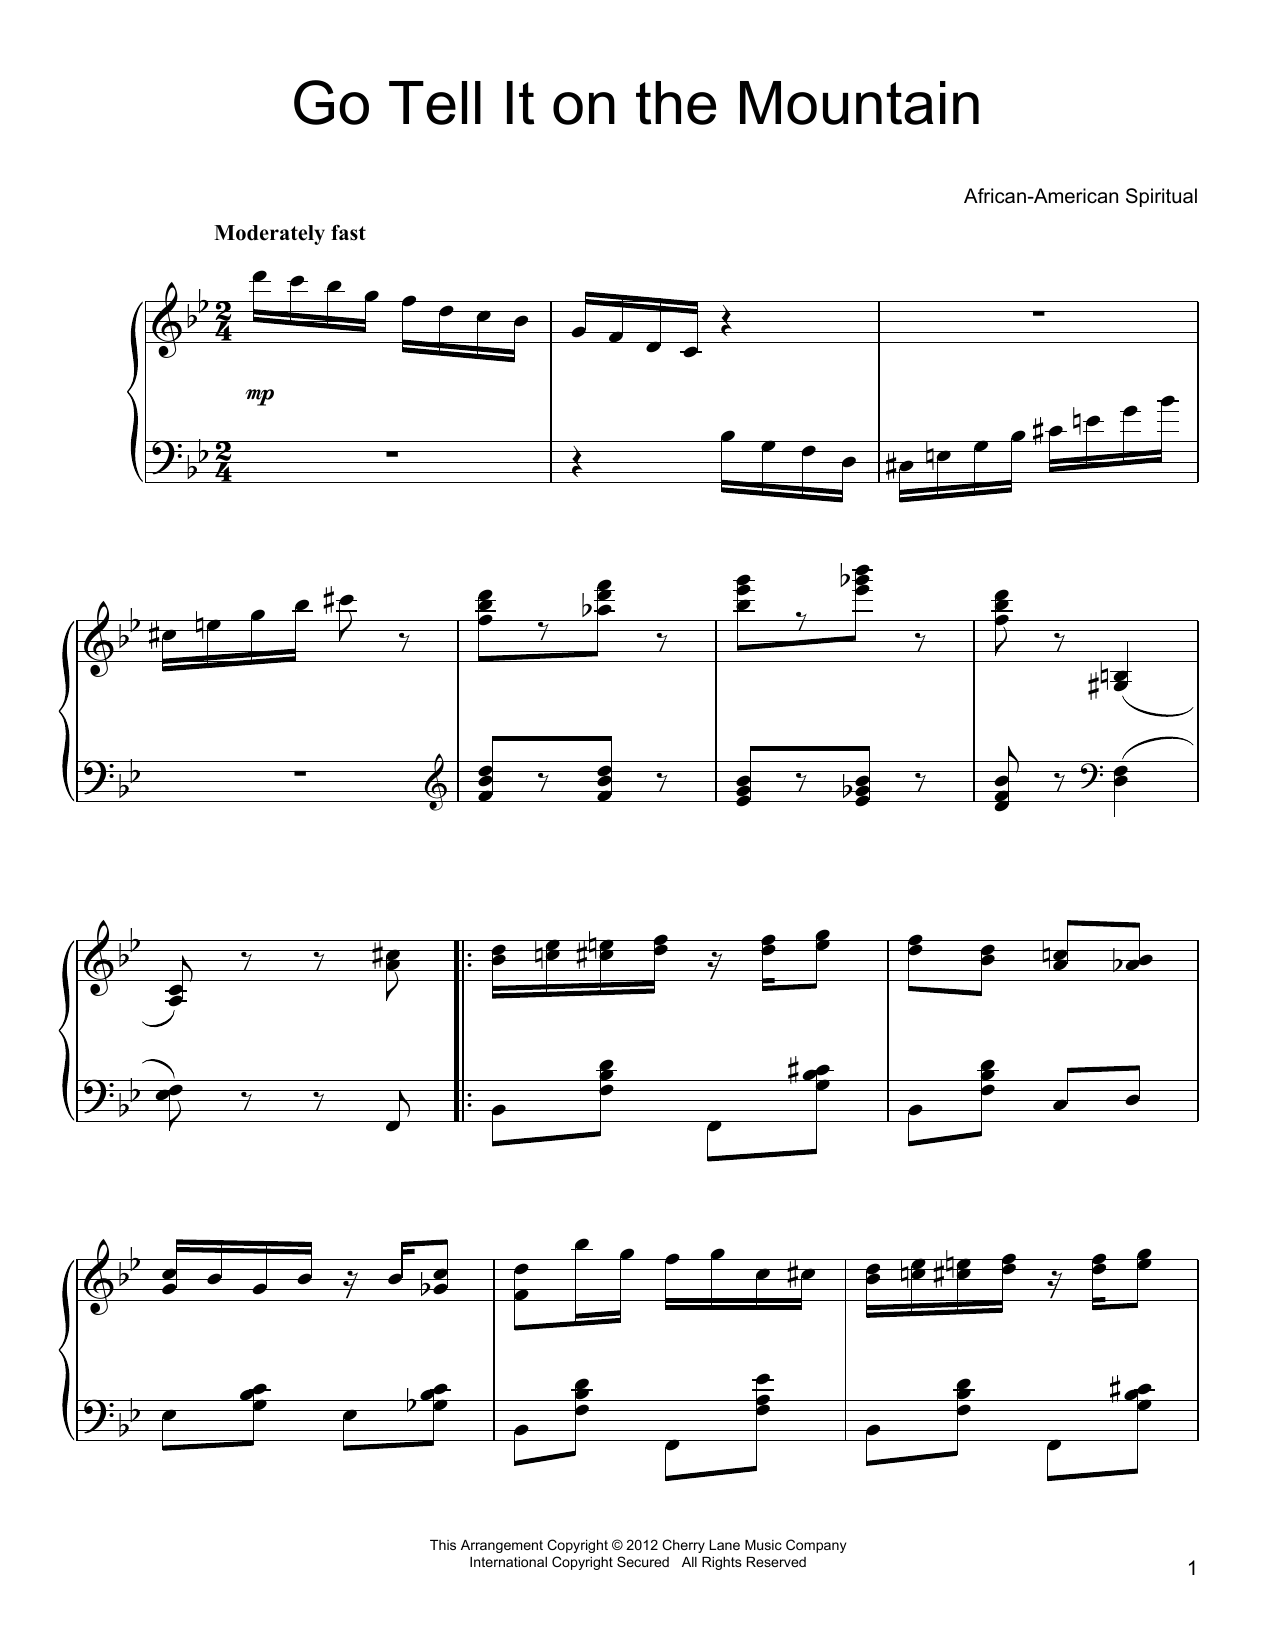 Download African-American Spiritual Go, Tell It On The Mountain Sheet Music